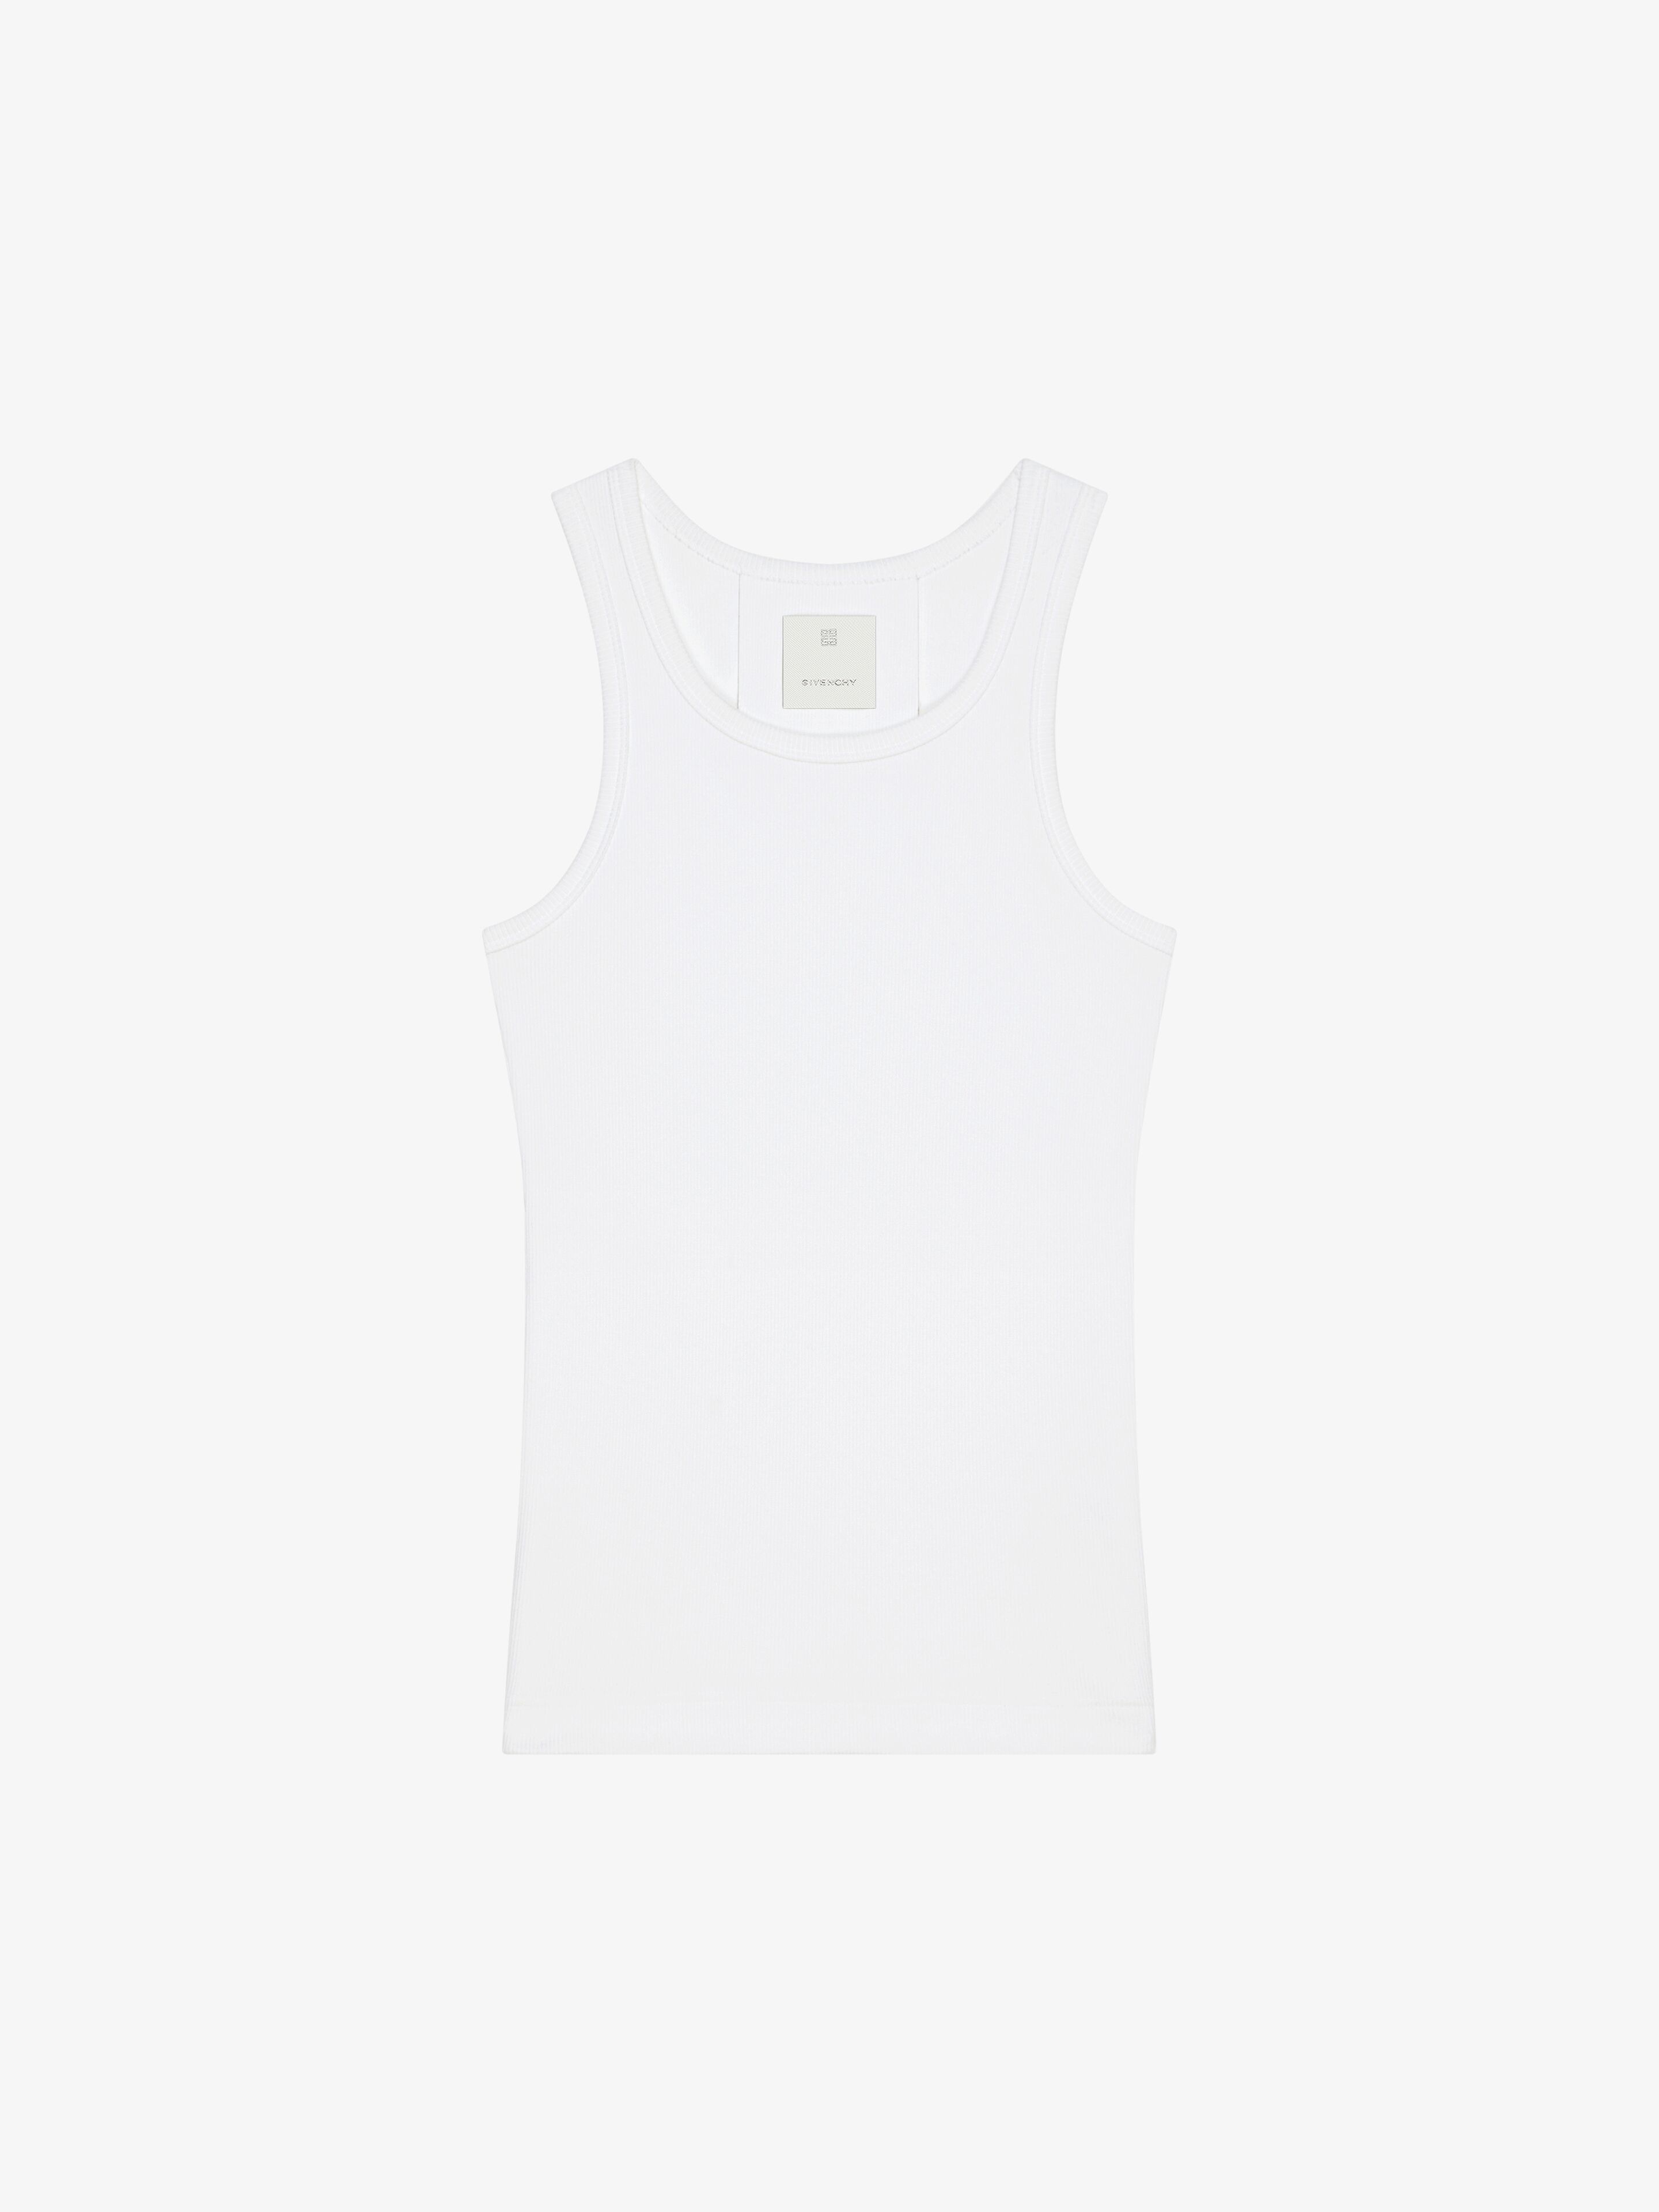 EXTRA SLIM FIT TANK TOP IN COTTON - 1